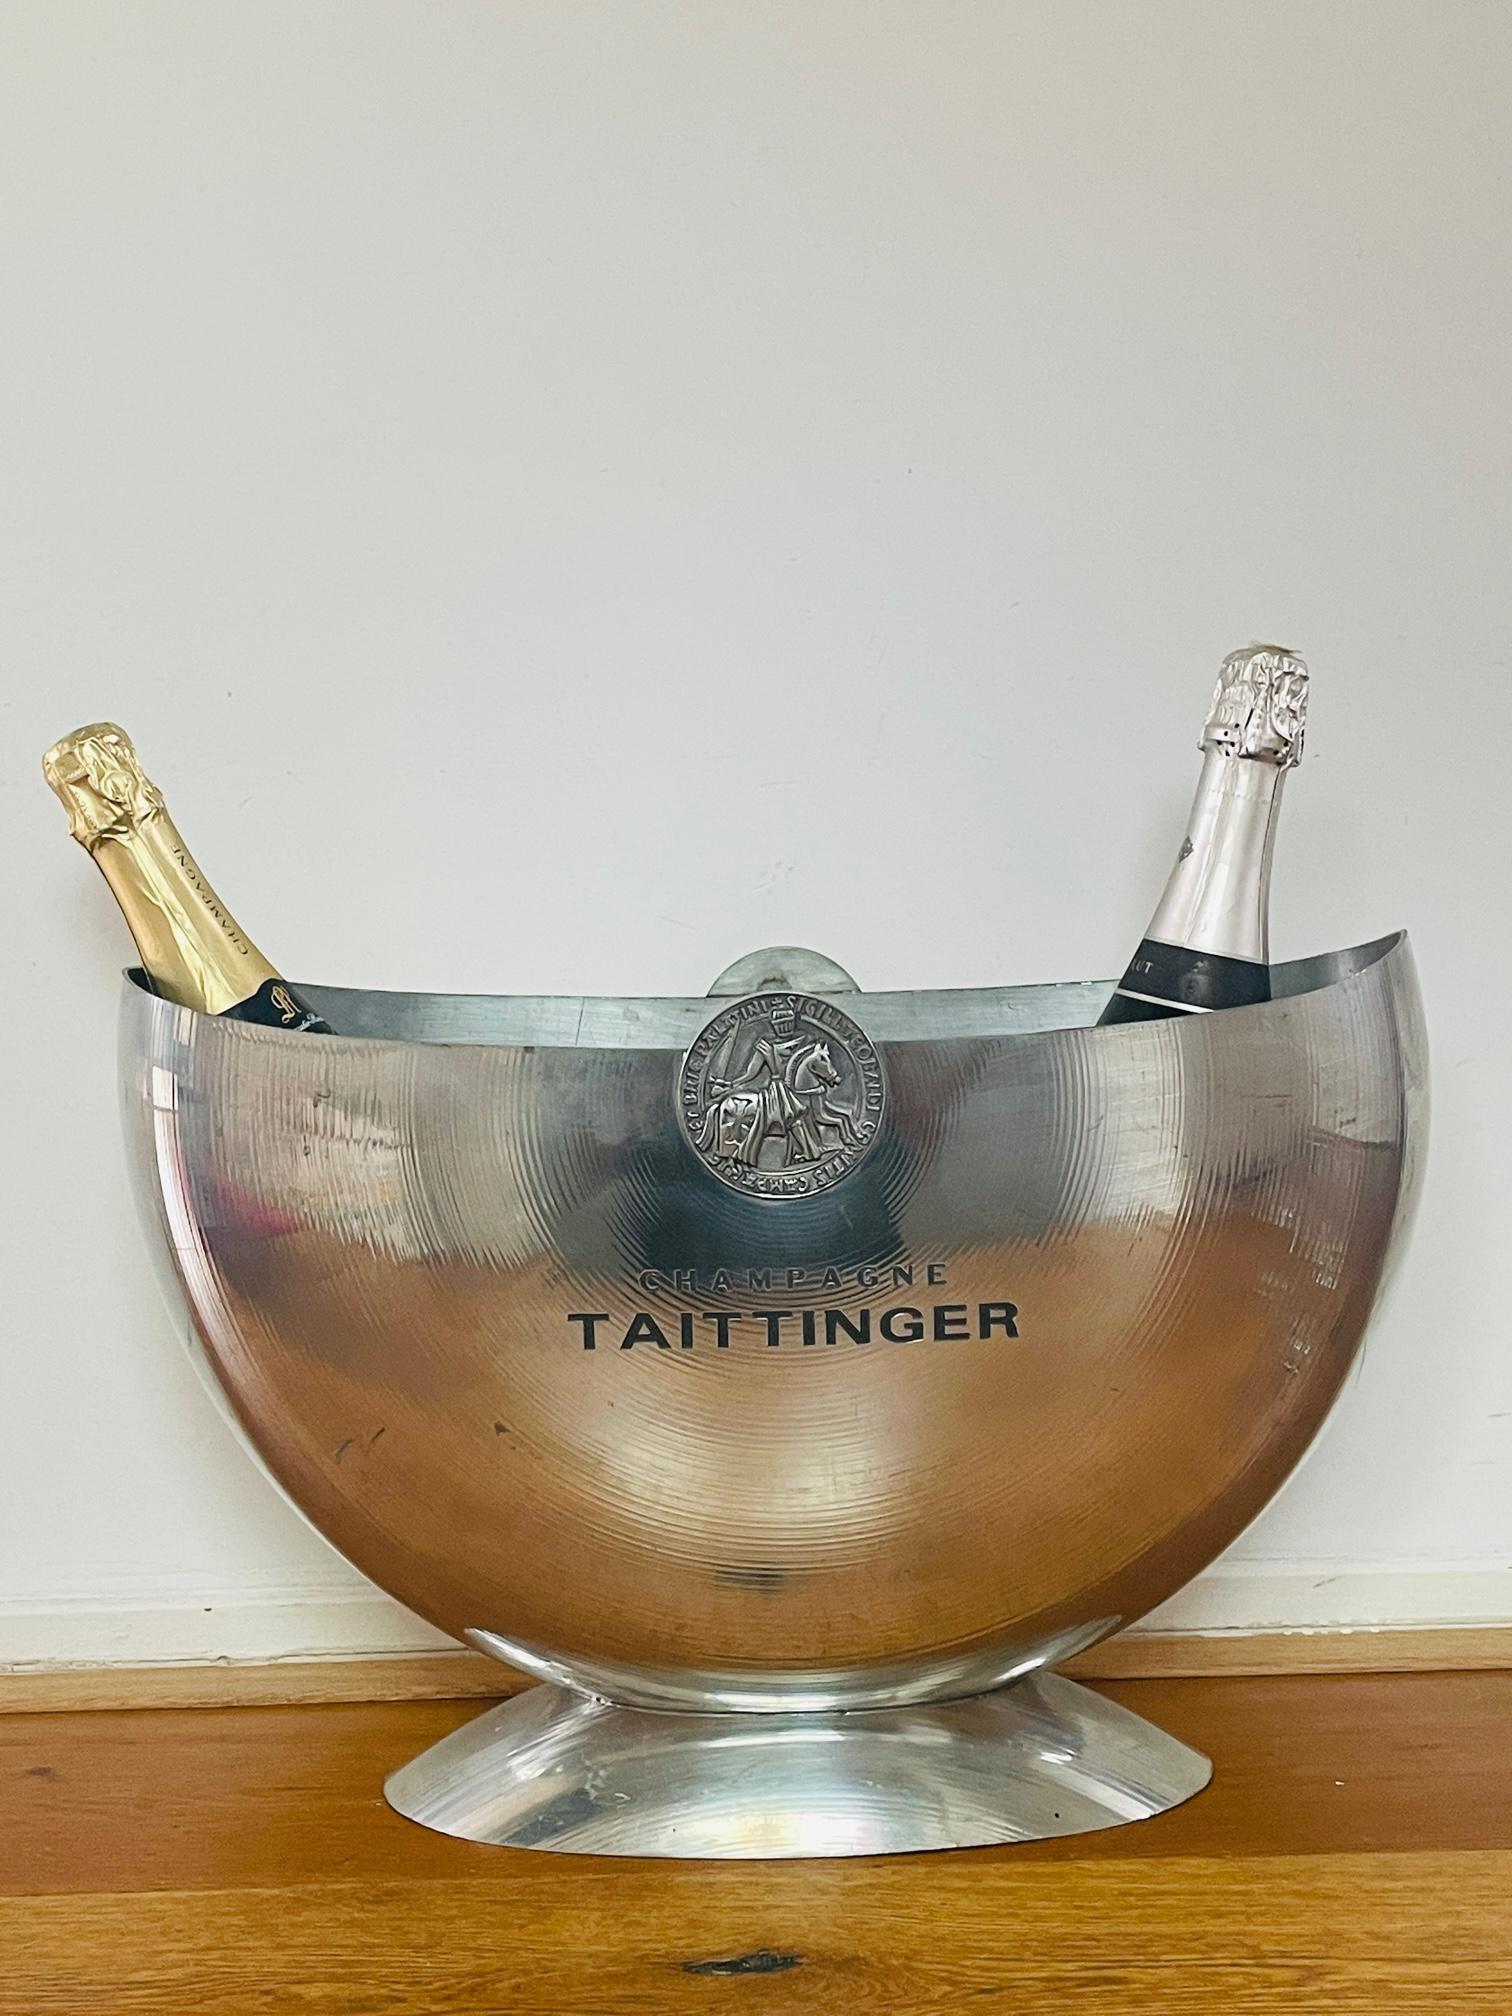 Taittinger half-moon Champagne bowl. Beautiful pewter champagne cooler by Etain 1